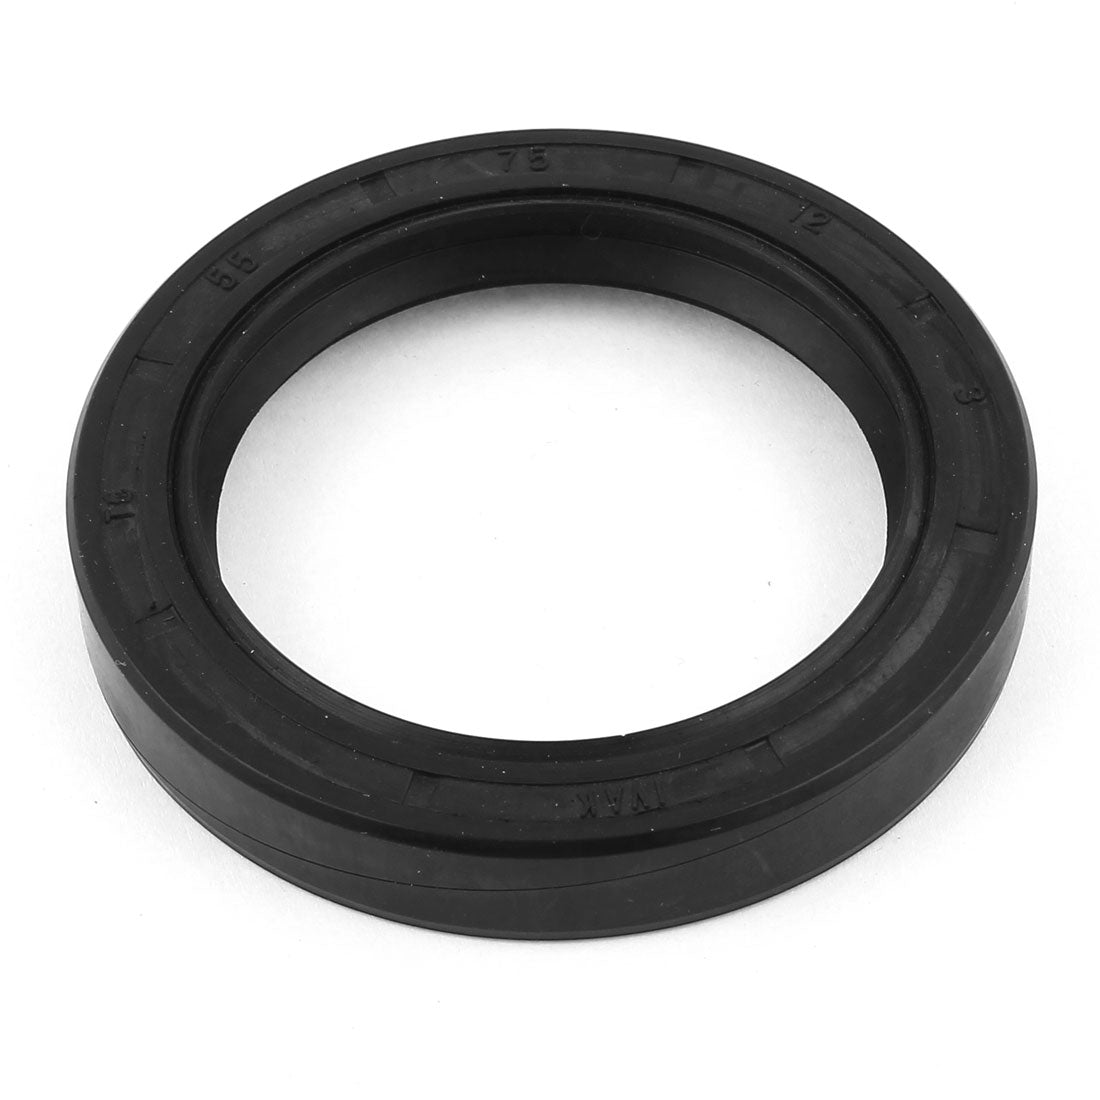 uxcell Uxcell Black NBR Ring Grooved Spring TC Oil Seal Gasket 75mm x 55mm x 12mm